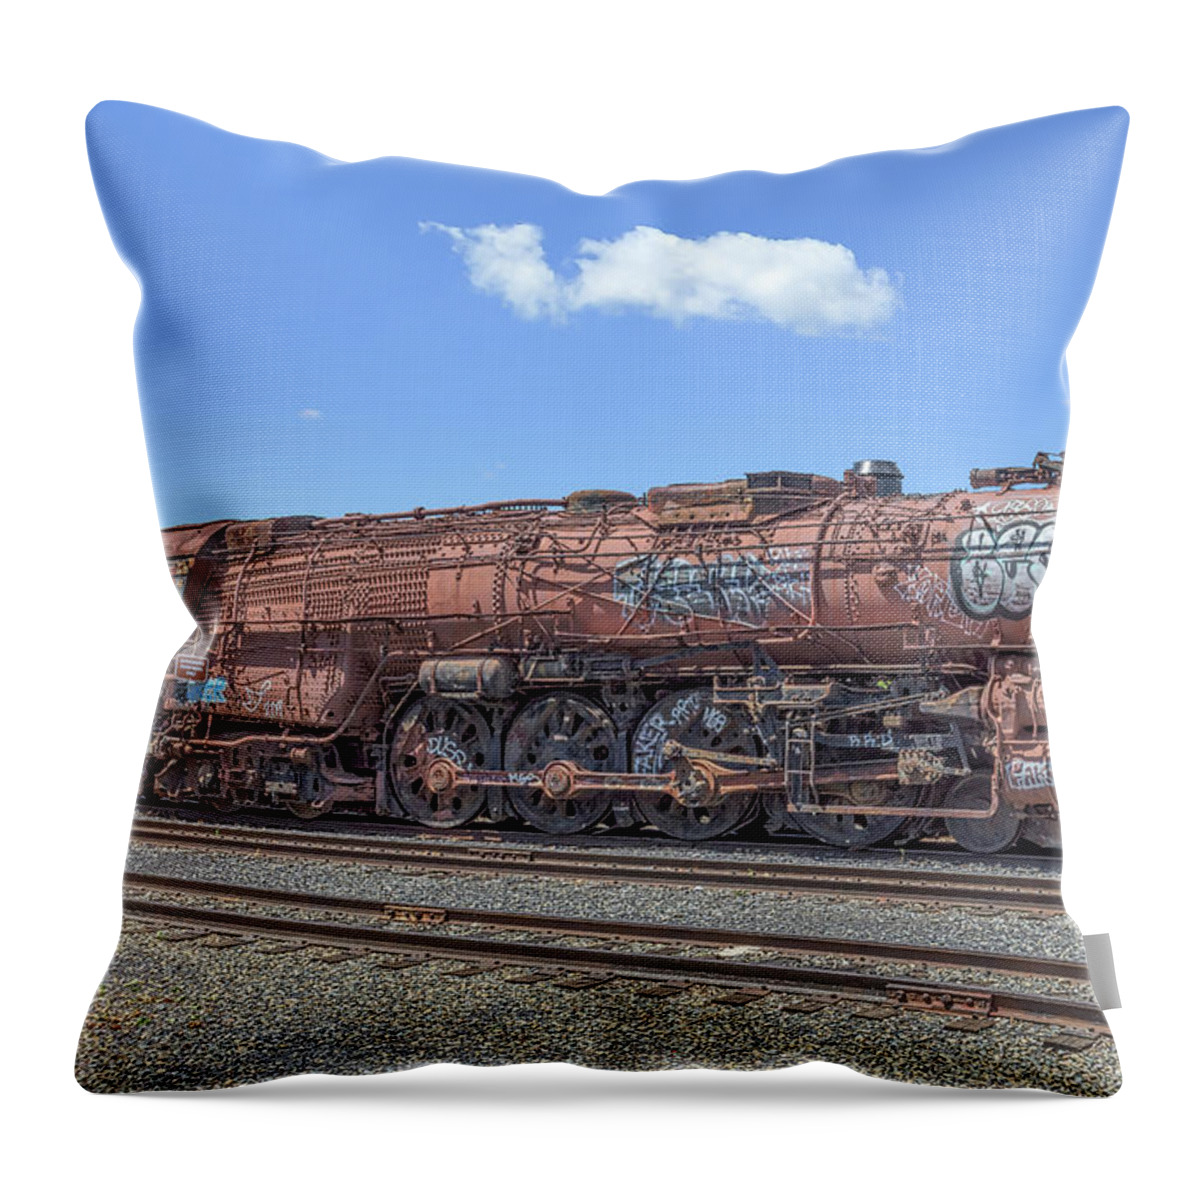 4-8-4 Throw Pillow featuring the photograph Atsf 2925 by Jim Thompson